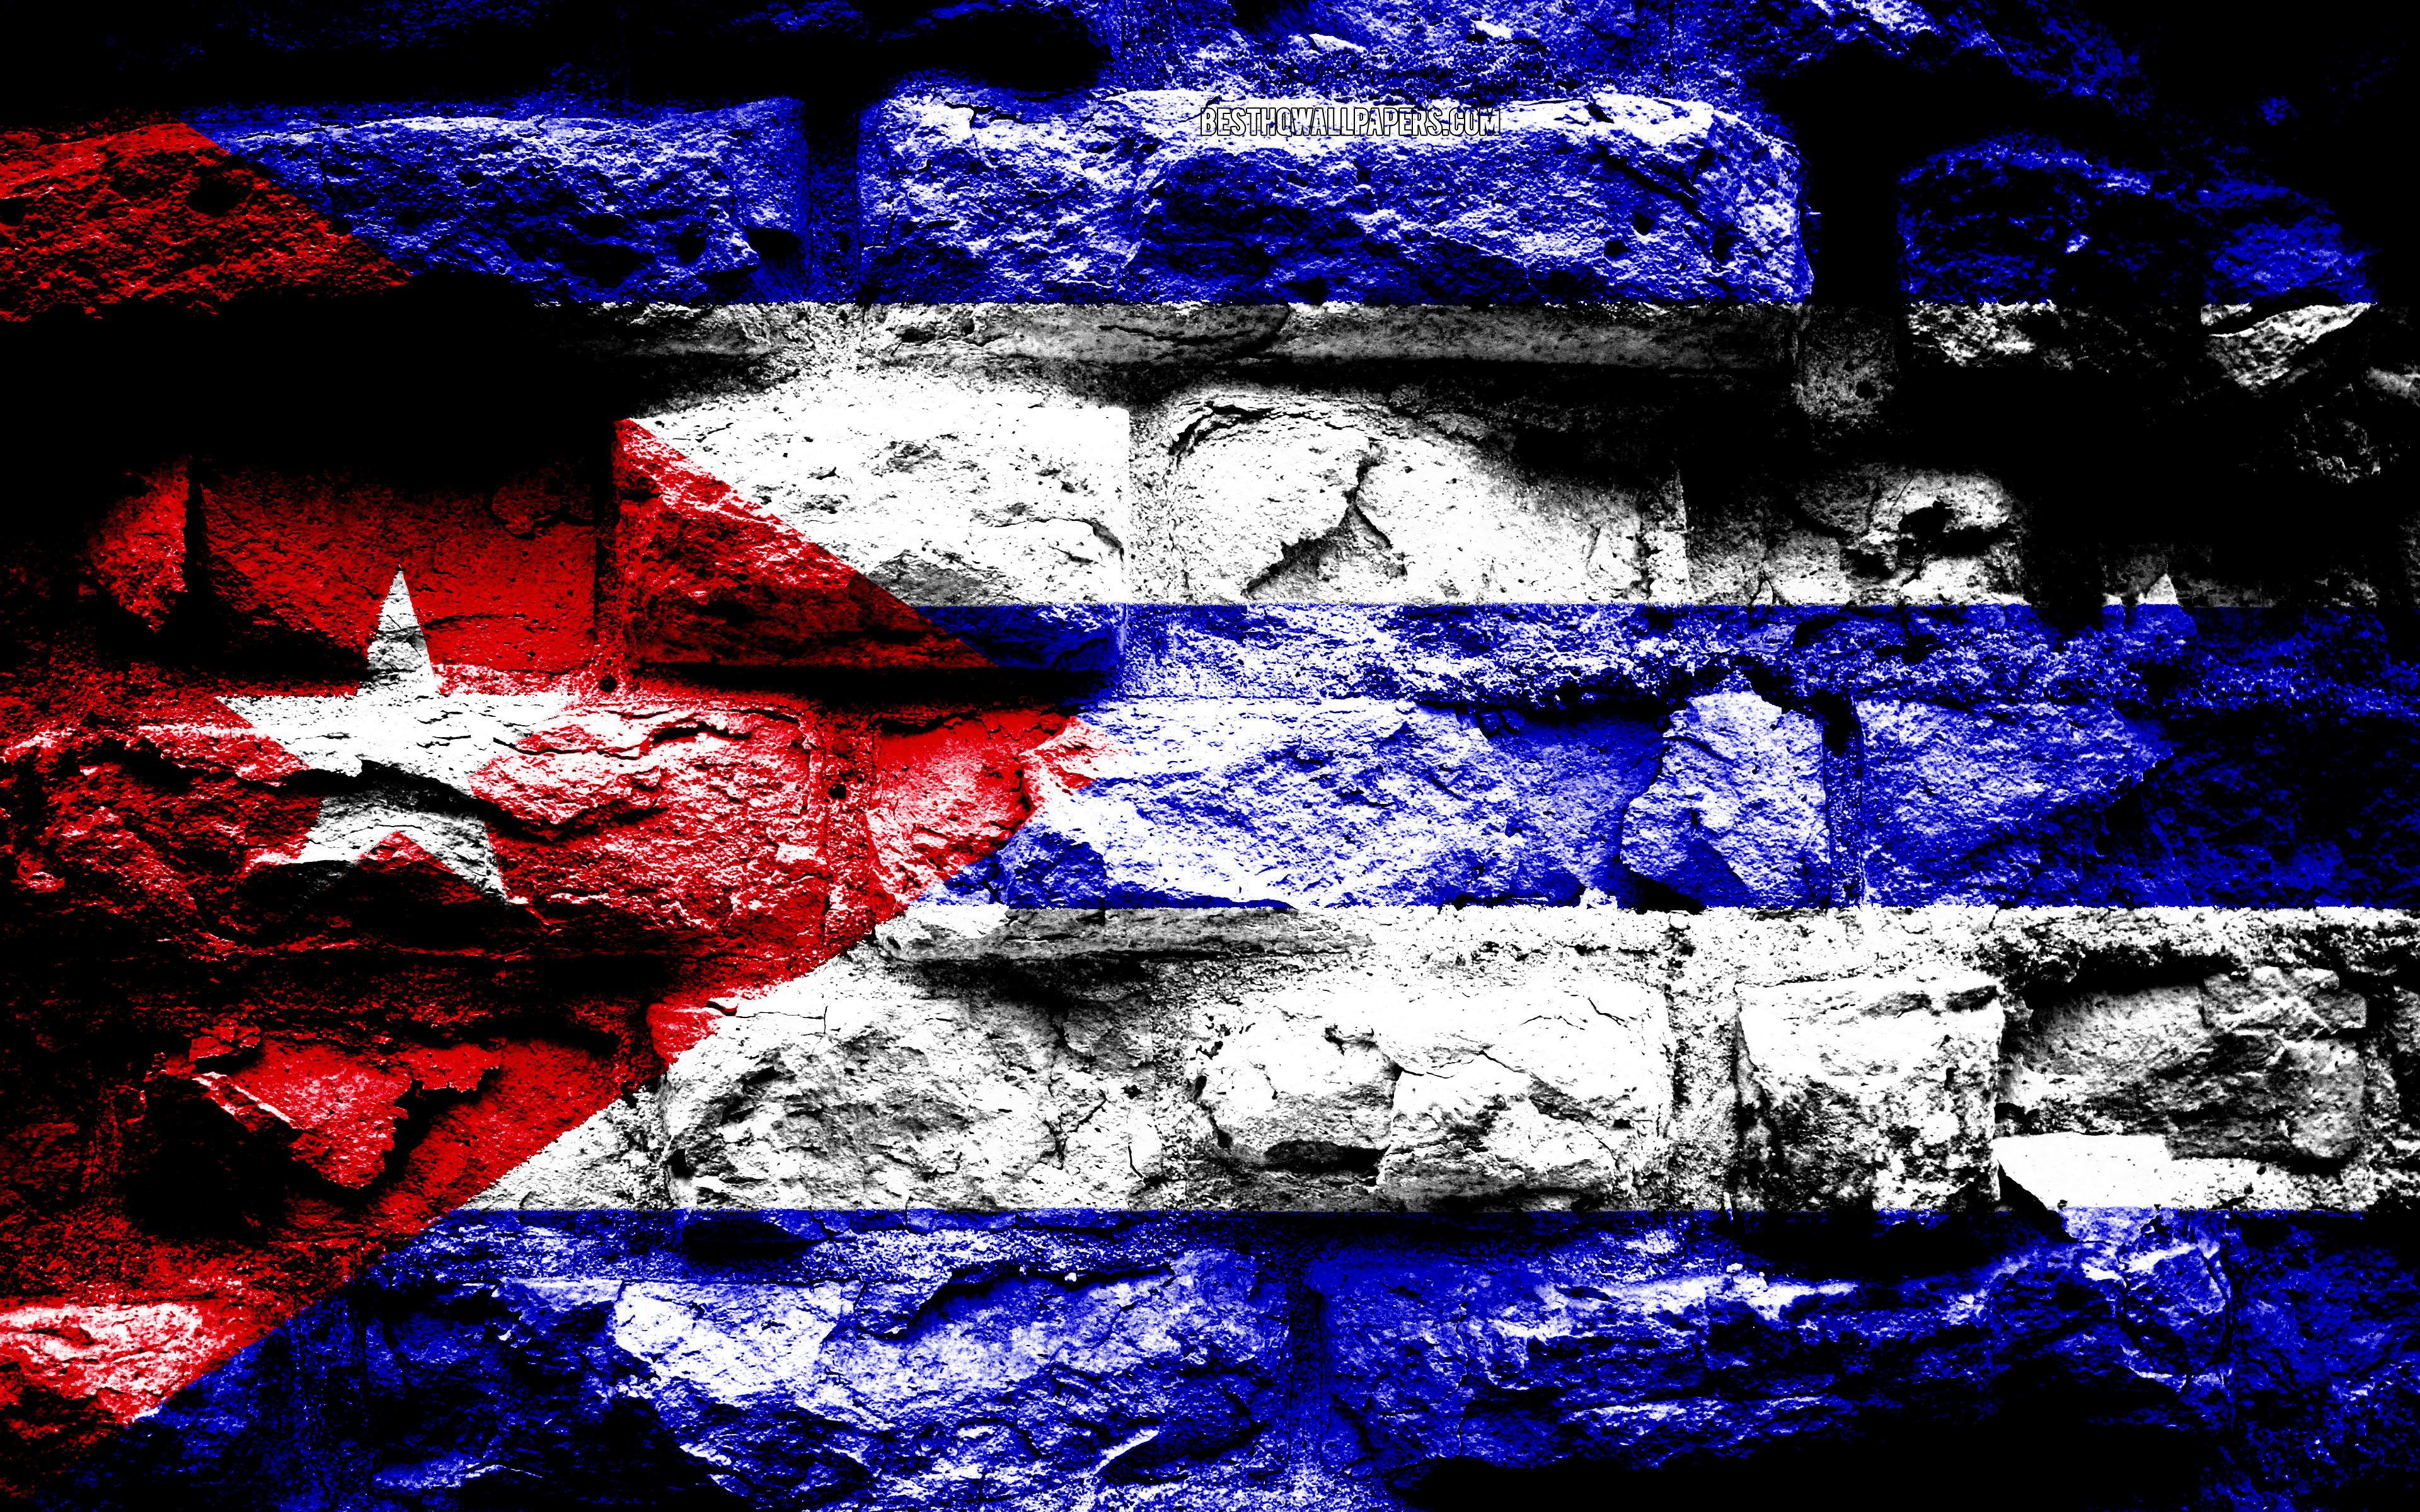 Download wallpaper Cuba flag, grunge brick texture, Flag of Cuba, flag on brick wall, Cuba, Europe, flags of North America countries for desktop with resolution 3840x2400. High Quality HD picture wallpaper